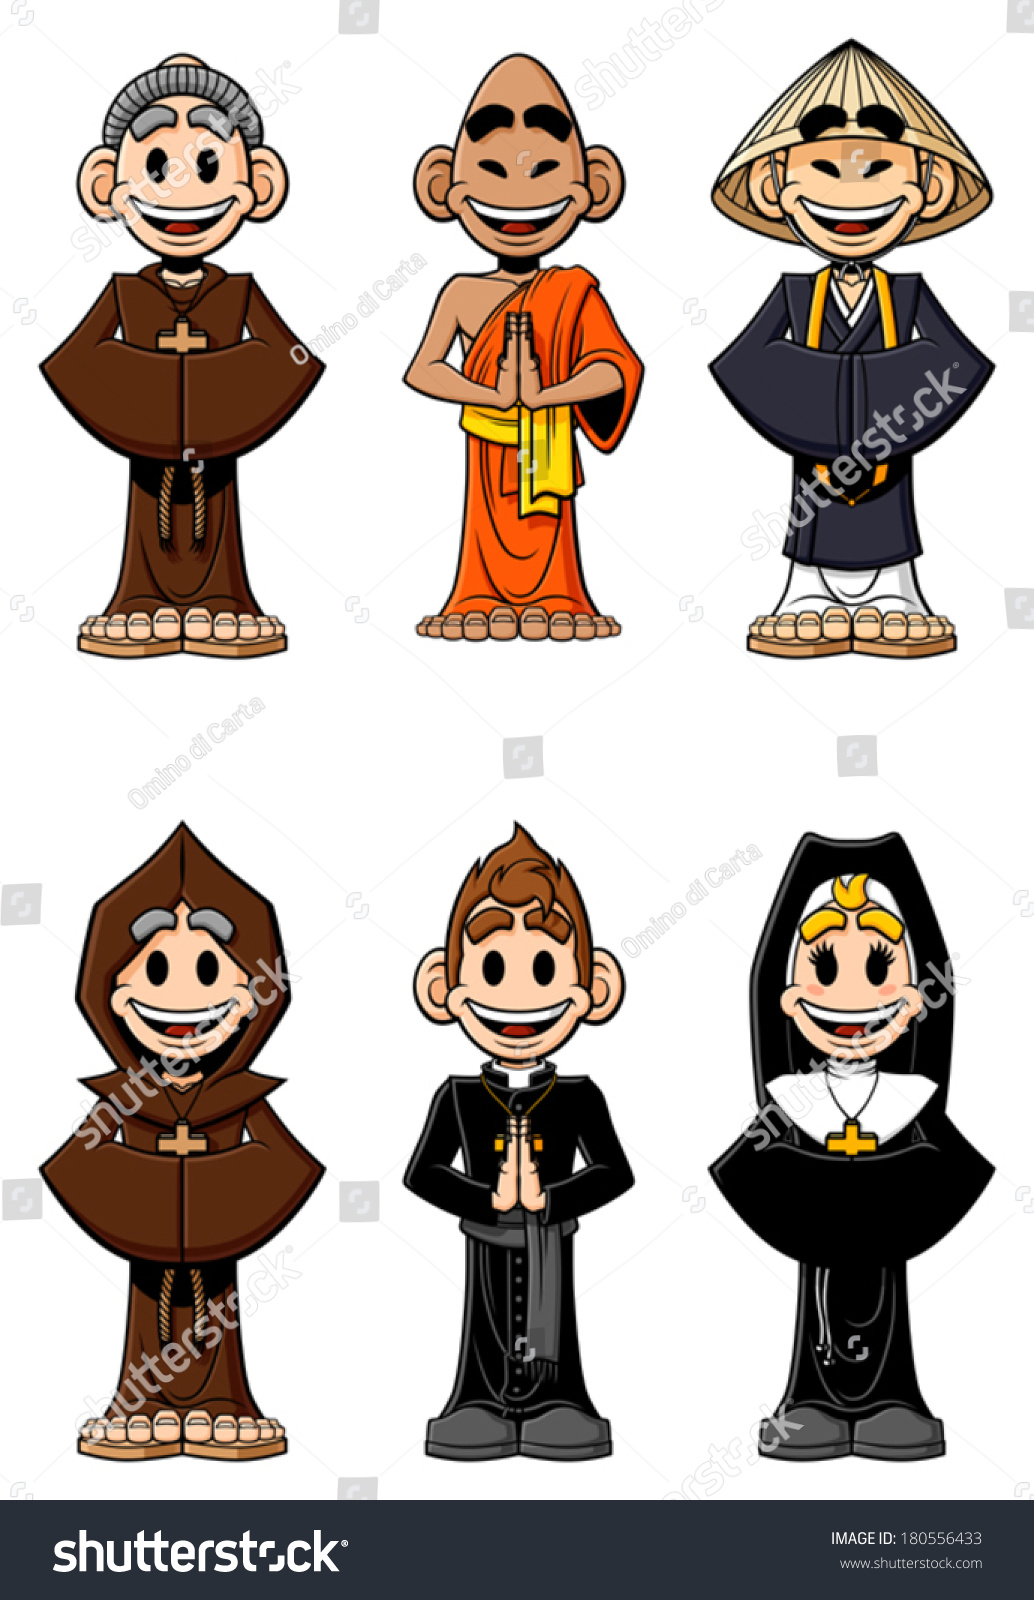 funny priest clipart - photo #31